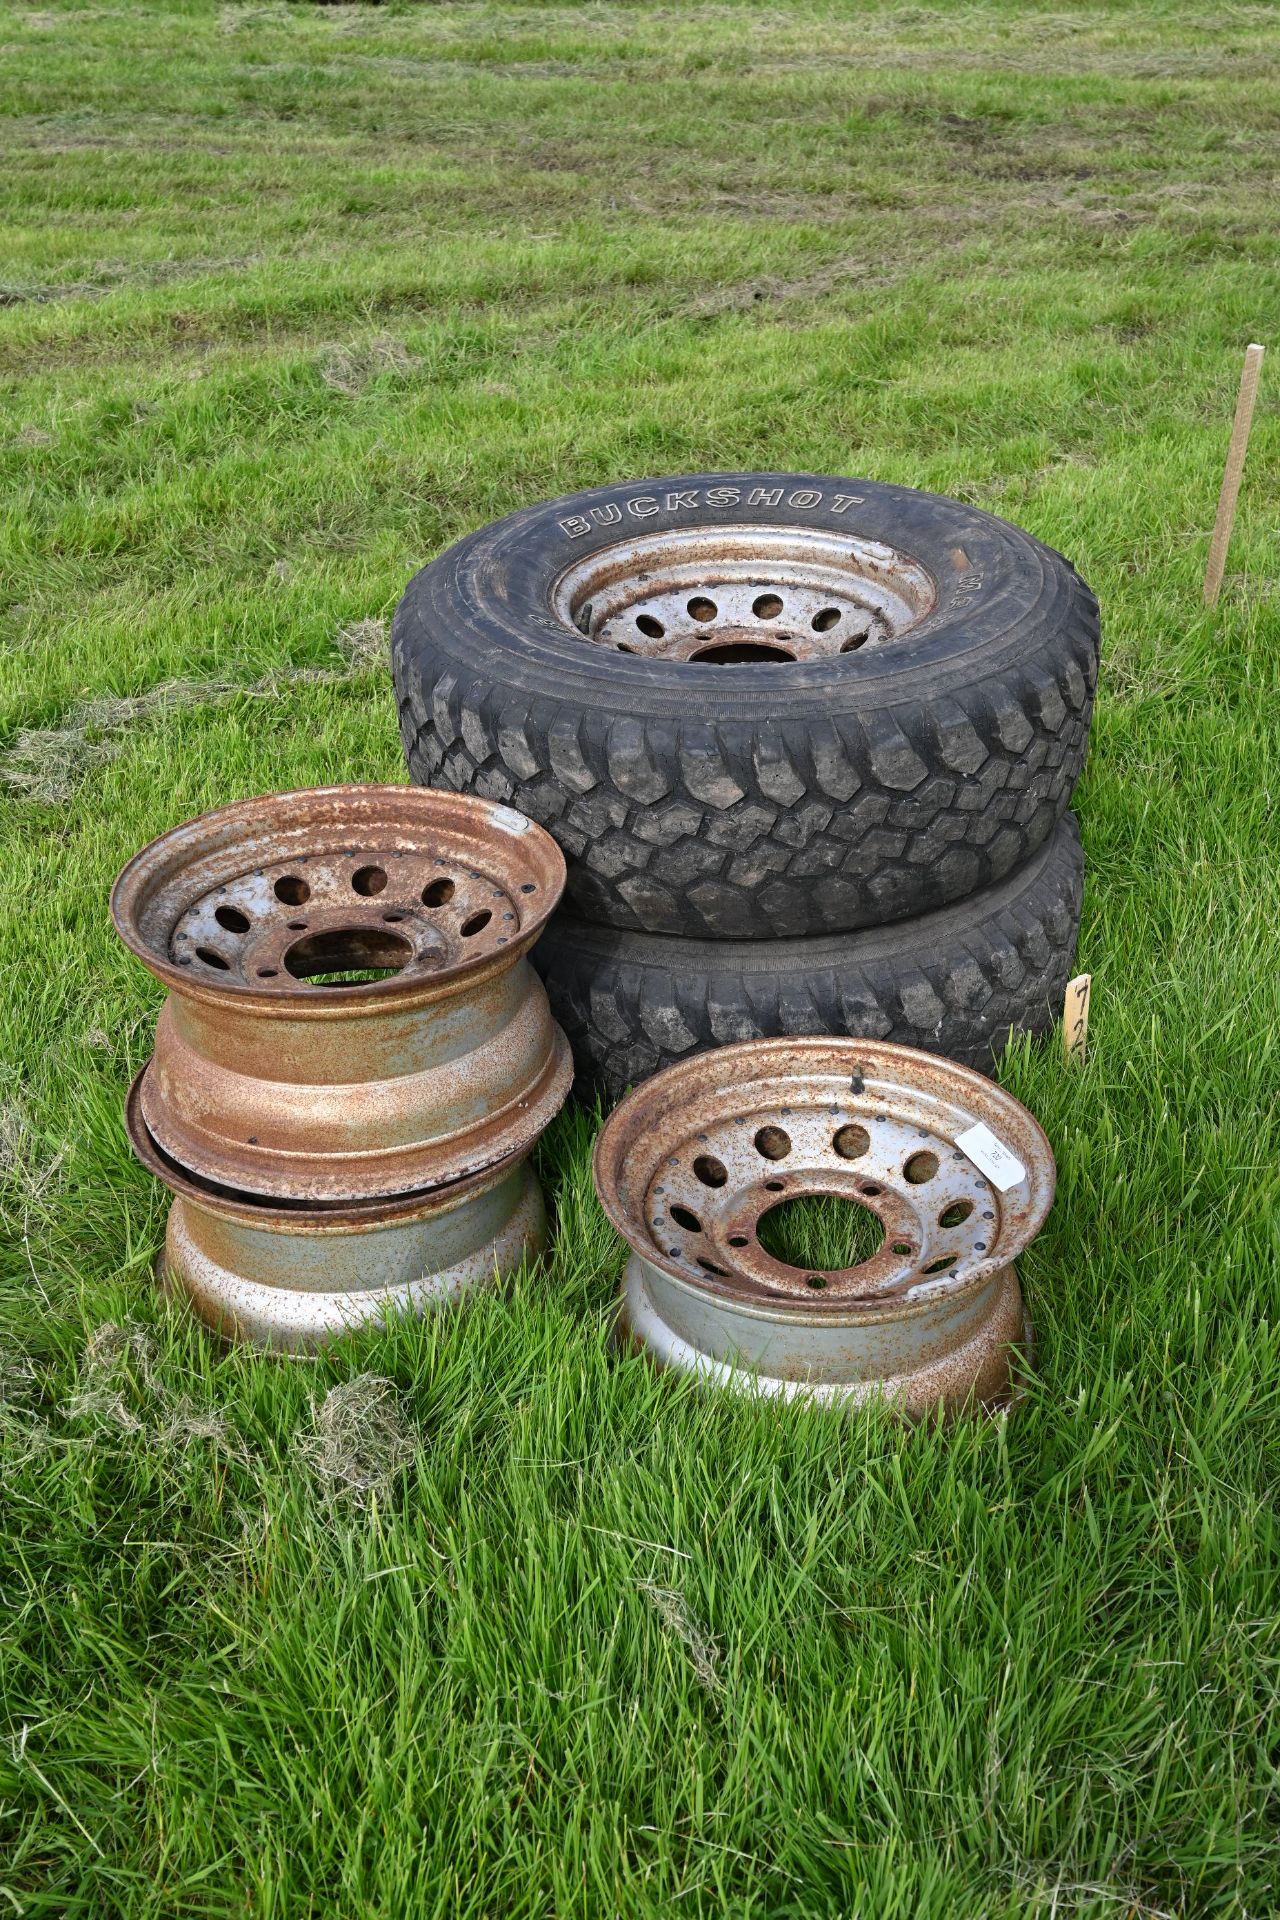 5x Defender/Discovery rims 8x16 (2 with tyres)